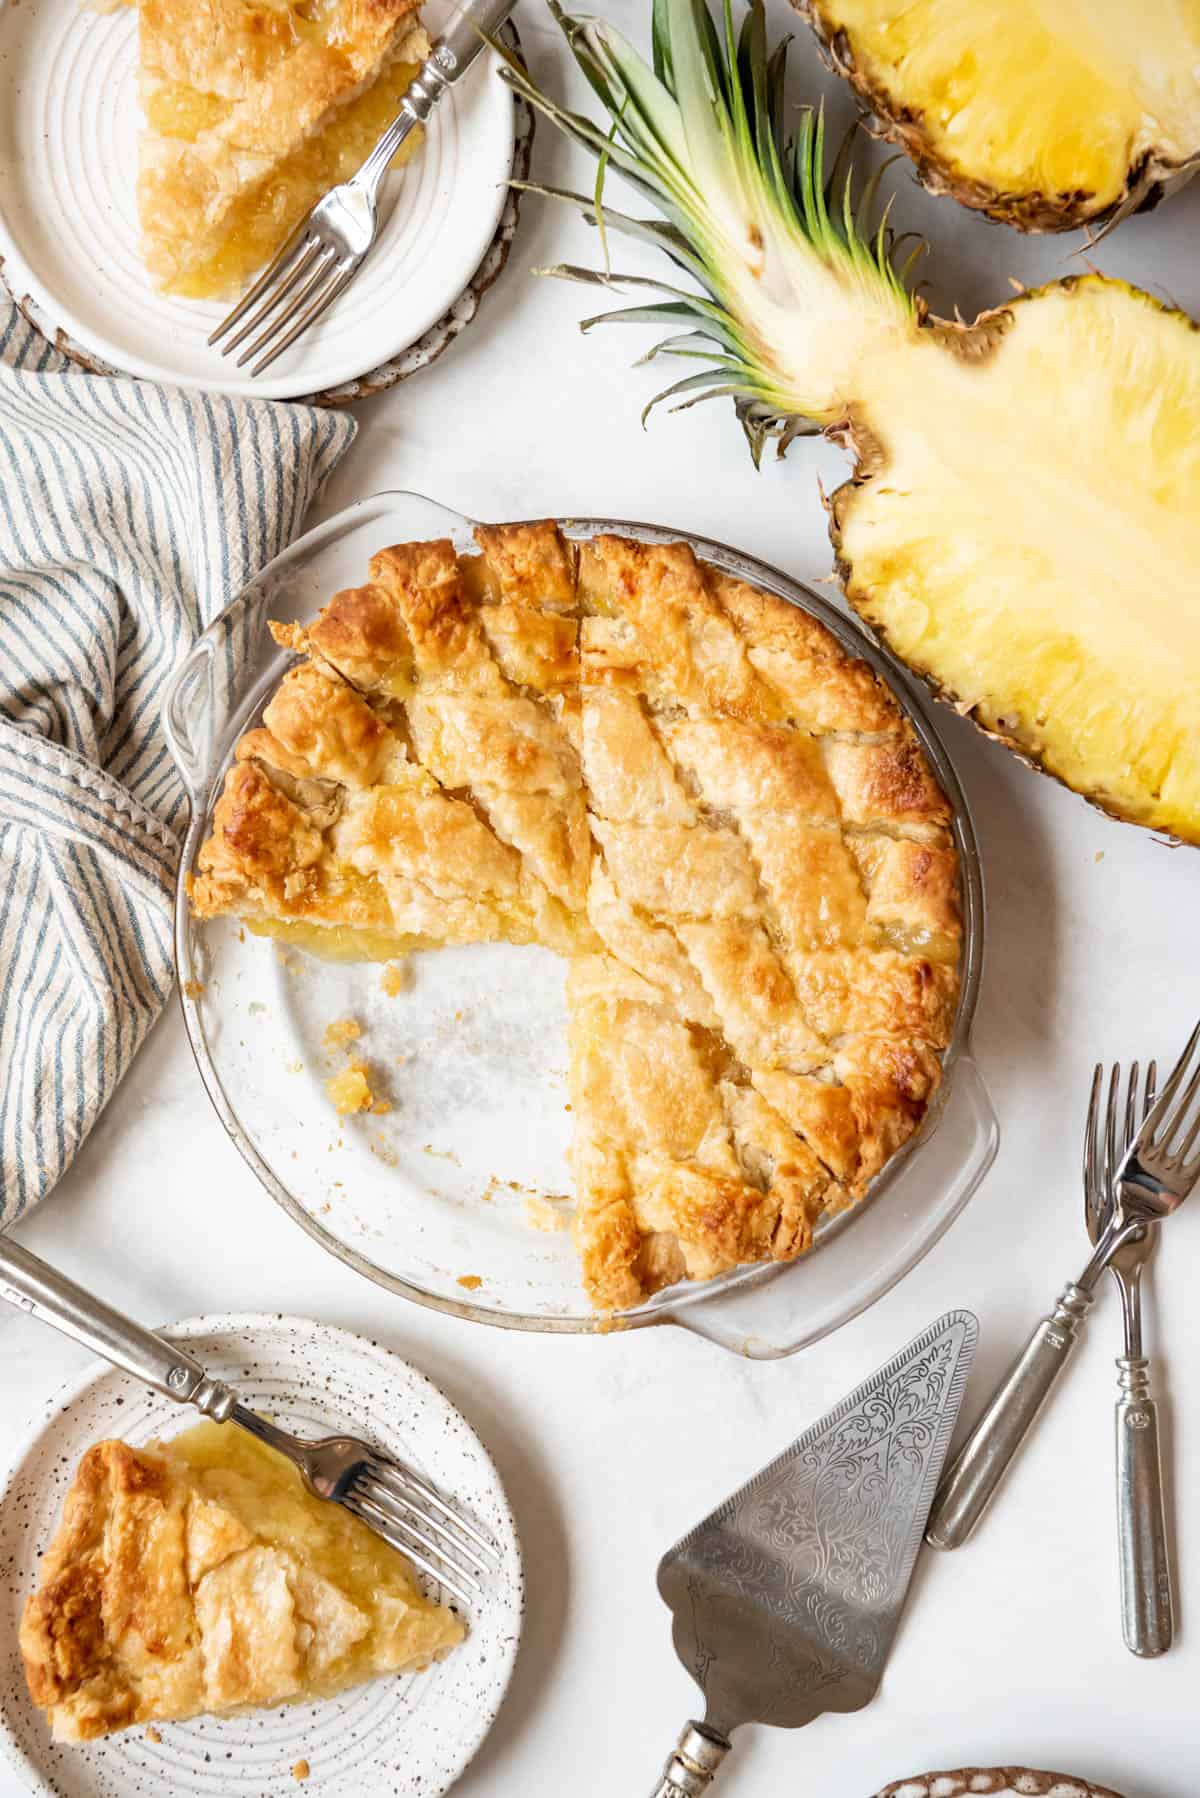 An overhead image of a double crust pineapple pie next to a sliced pineapple half.